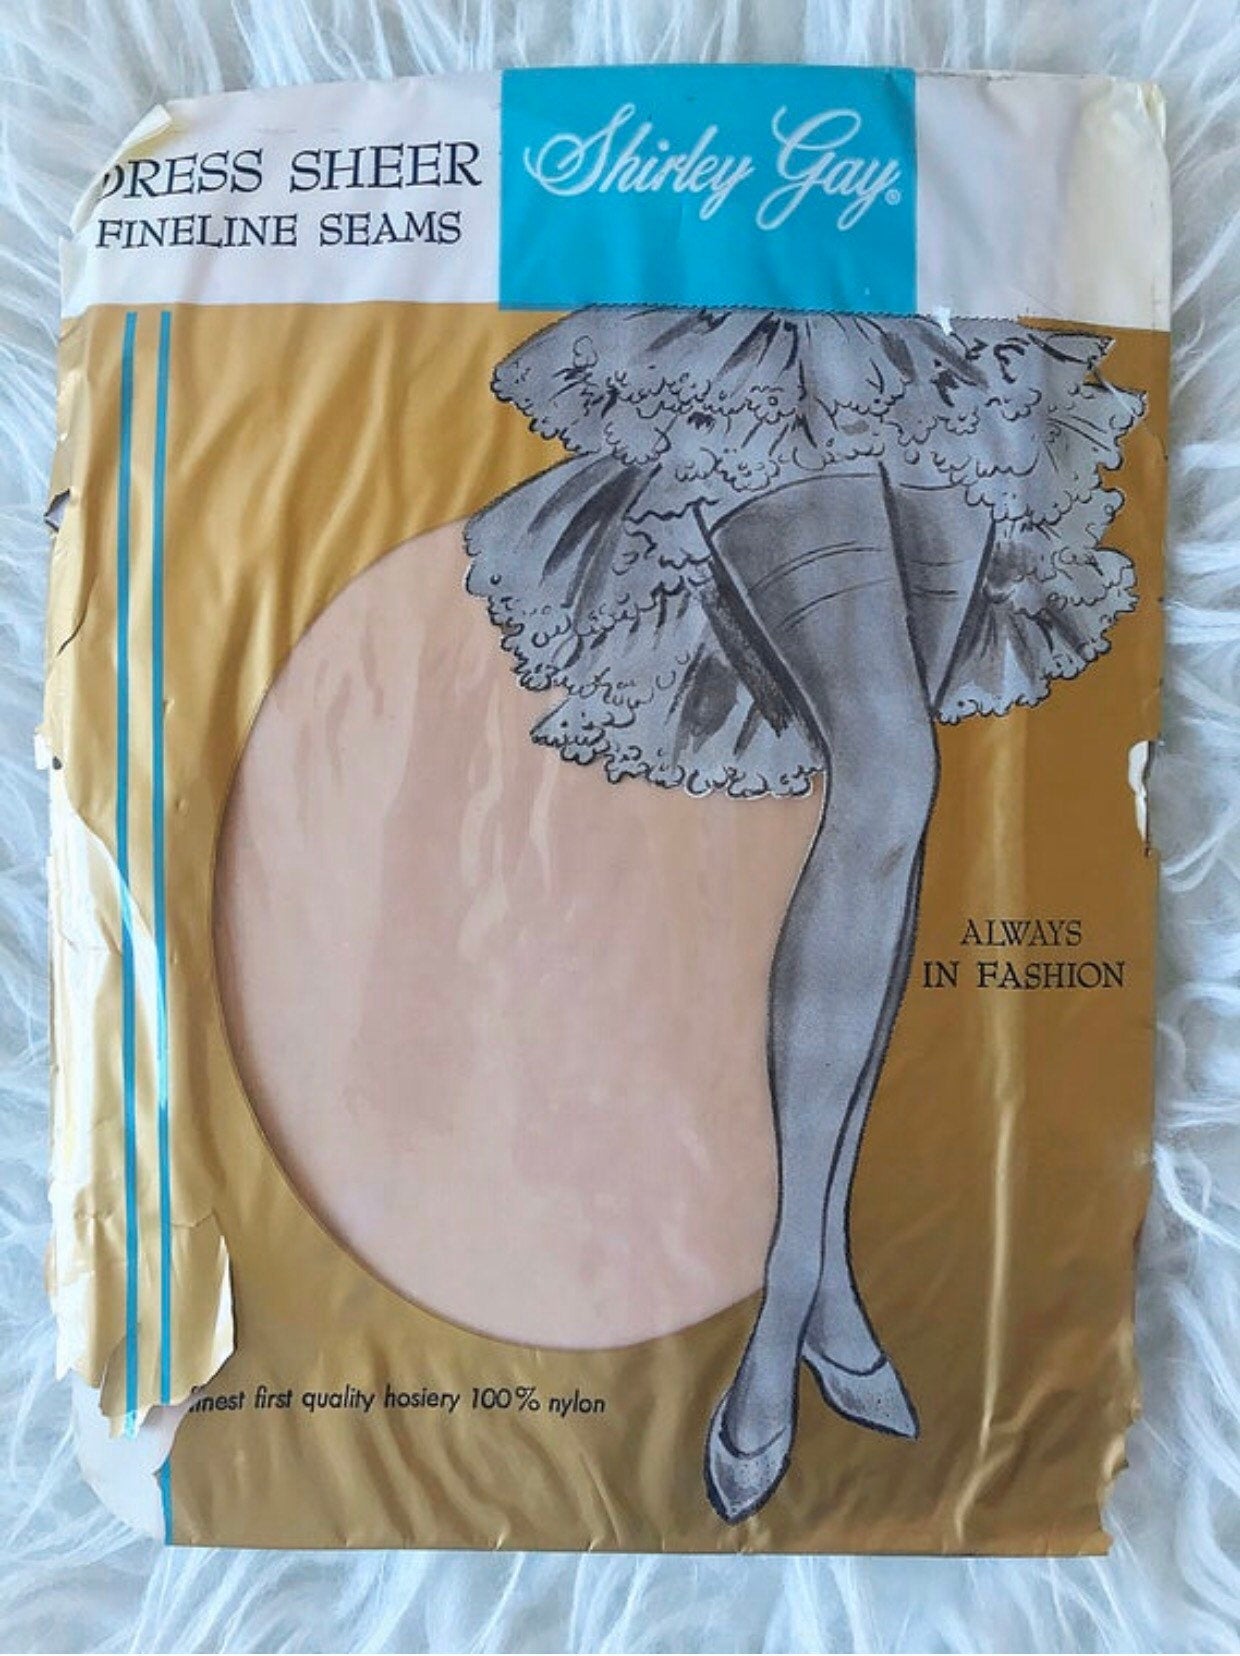 Vintage 1960's SHIRLEY GAY Retro DEADSTOCK New in Package Seamless Knee High Pantyhose Hosiery Stockings Size 9 1/2